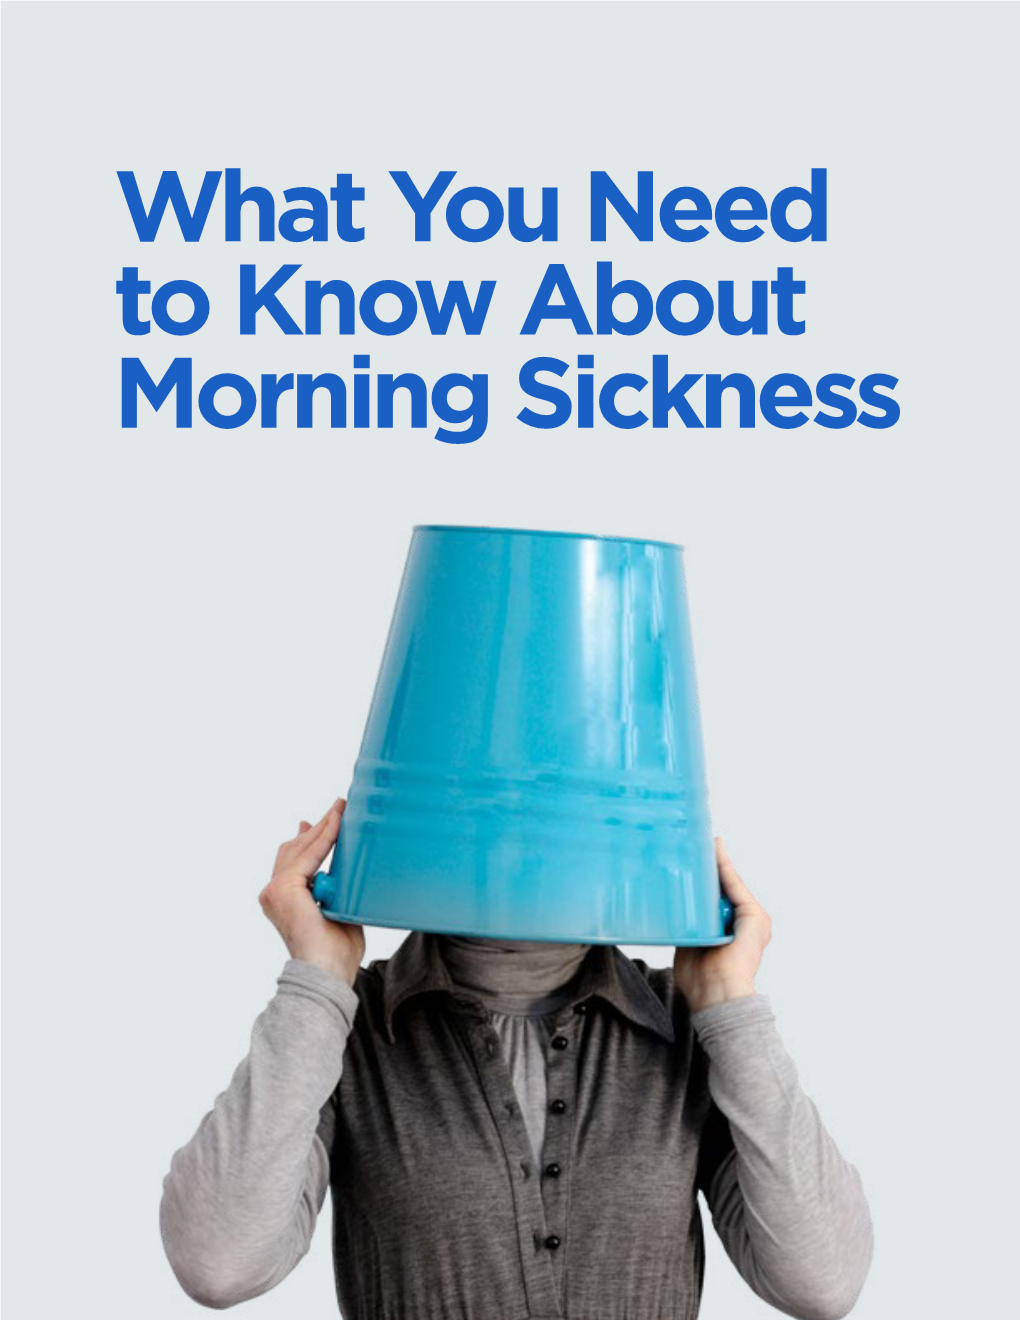 What You Need to Know About Morning Sickness What Is Morning Sickness? Morning Sickness Is Nausea And/Or Vomiting That Many Pregnant Women Experience